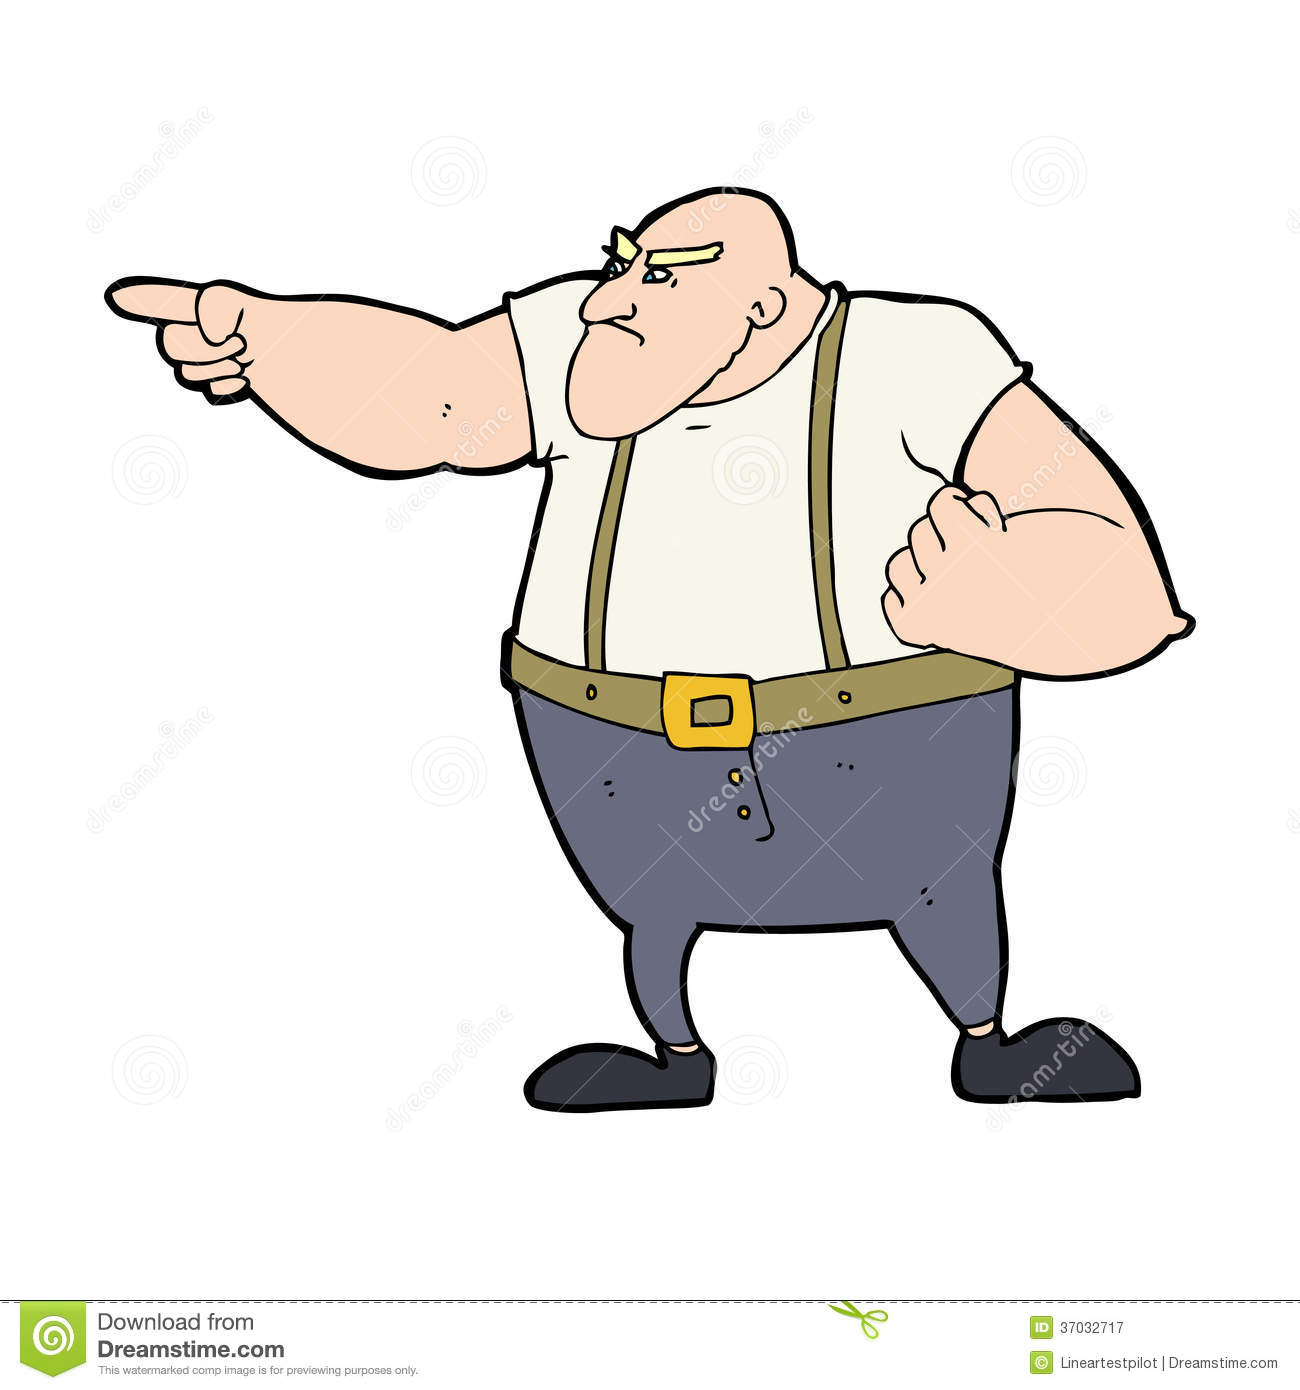 Cartoon Angry Tough Guy Pointing Royalty Free Stock Photography